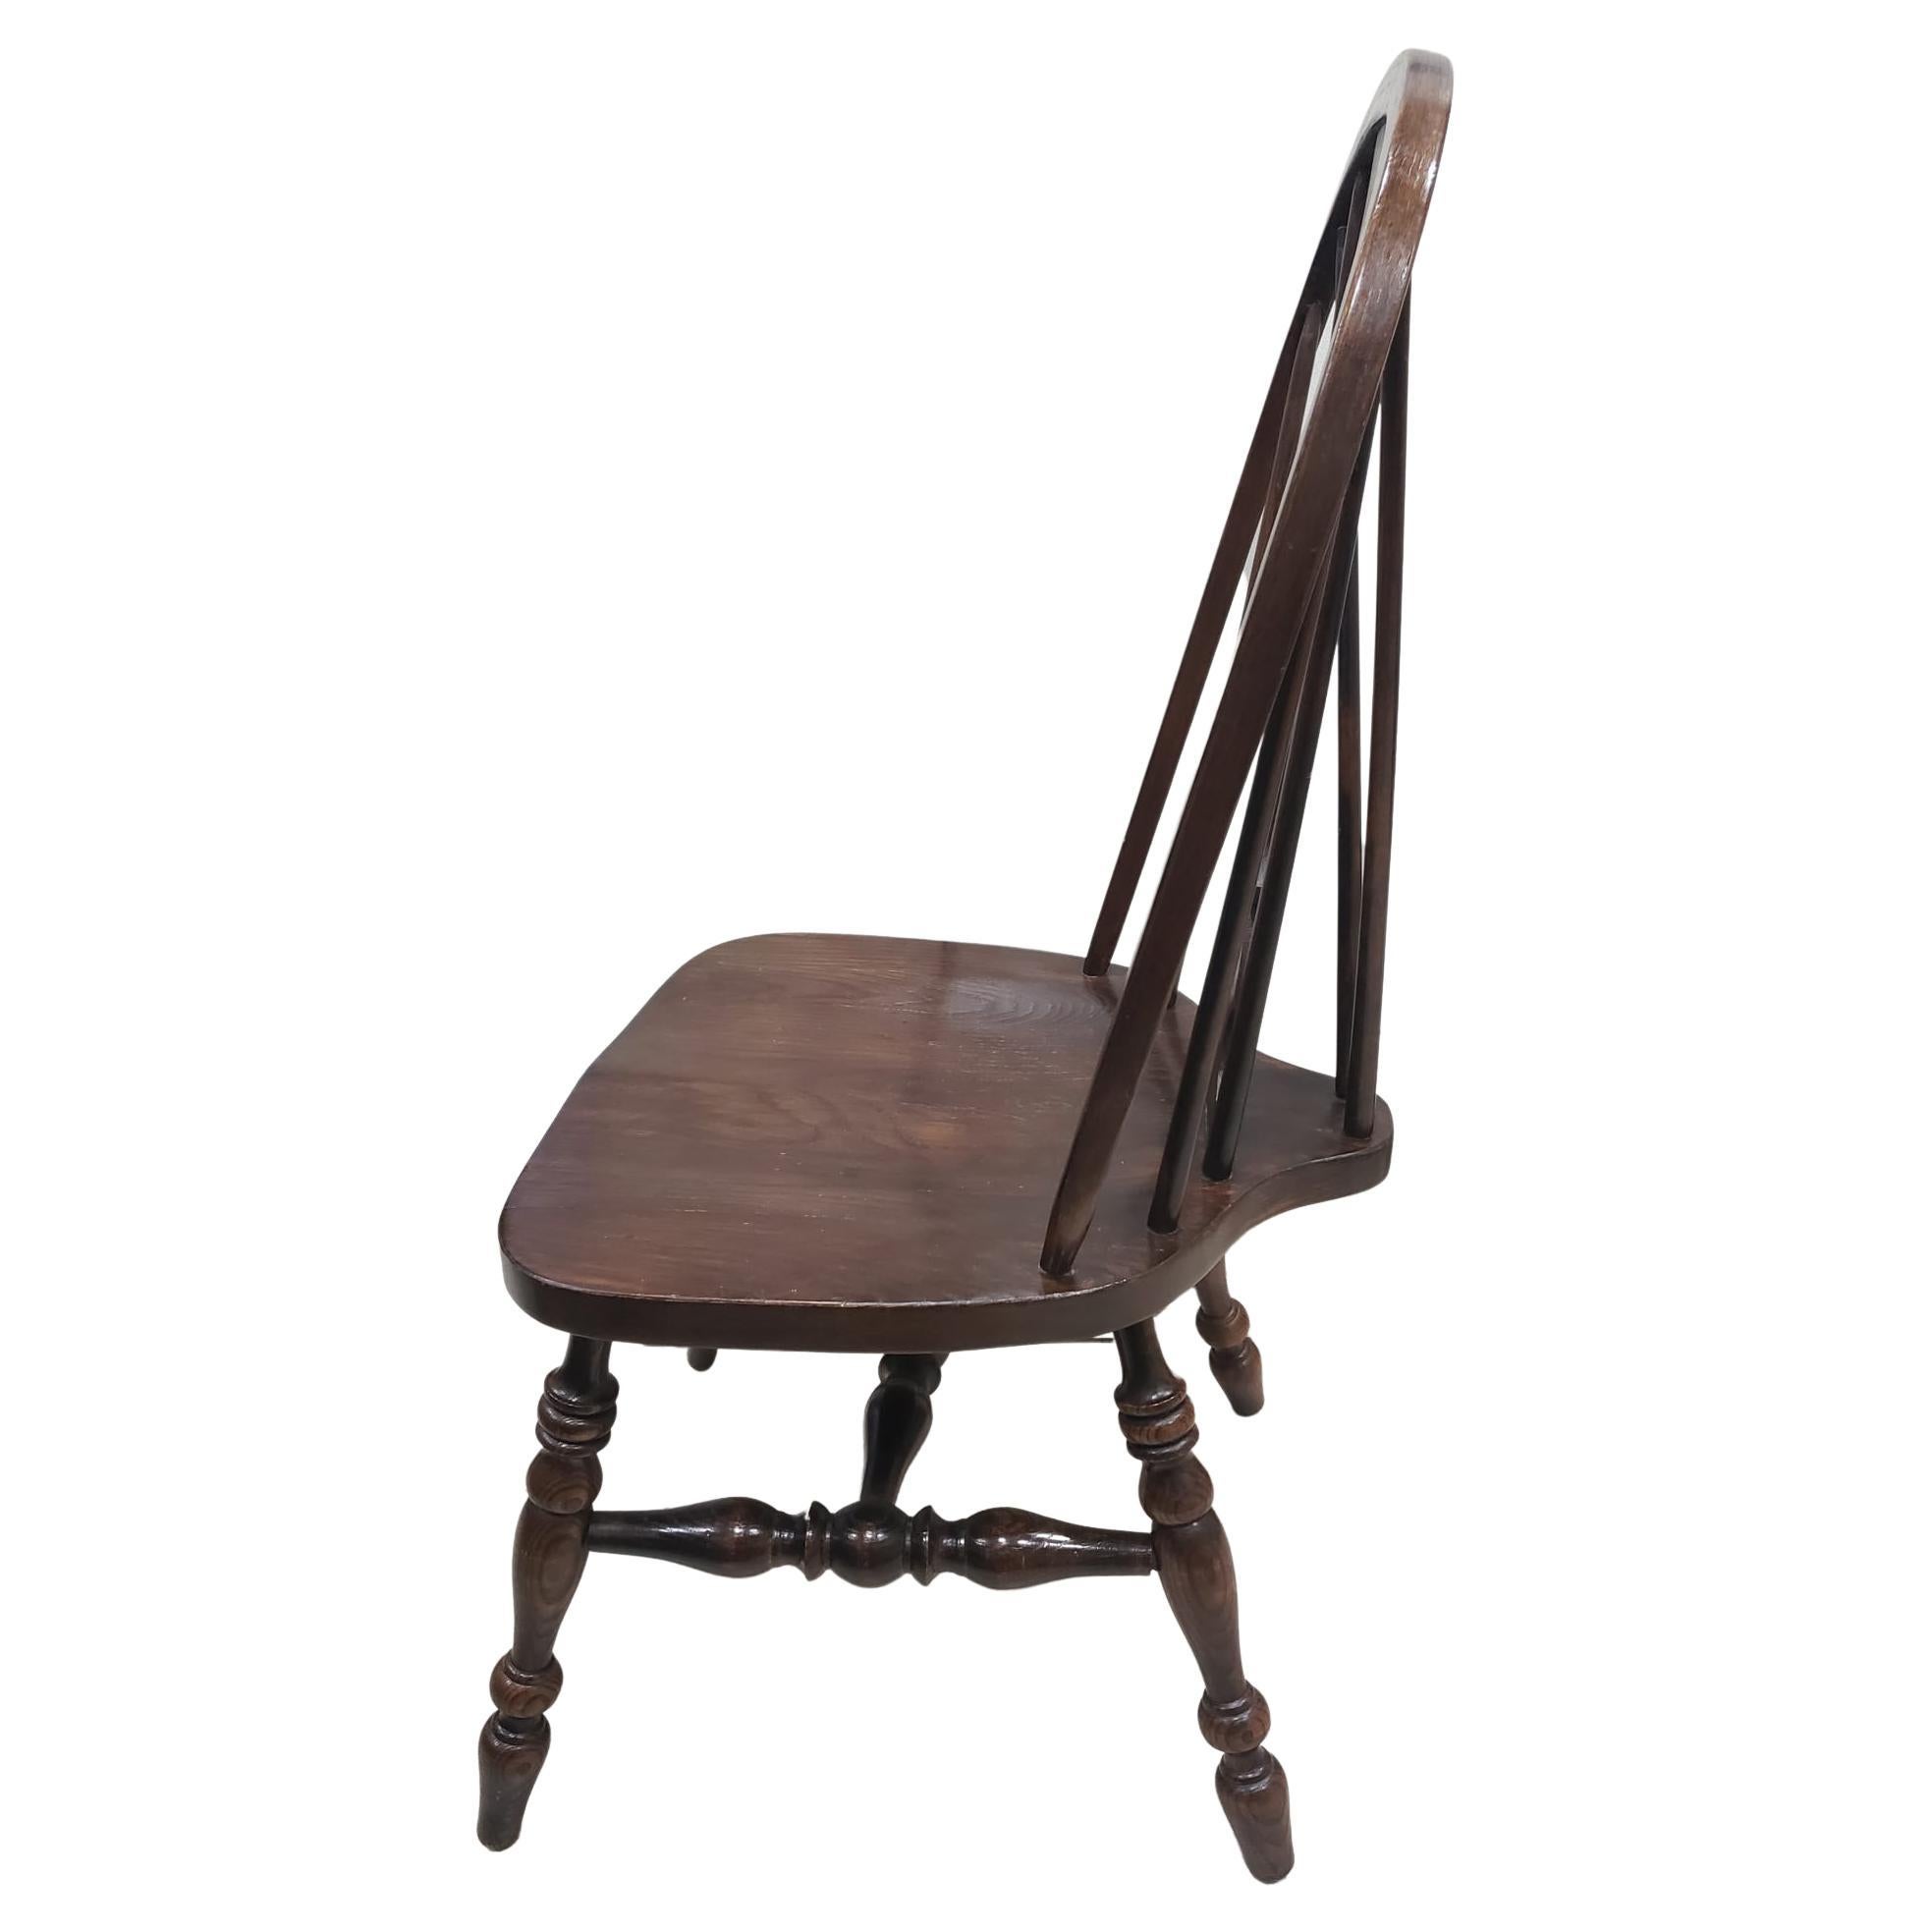 American Pennsylvania House Solid Oak Fiddle Back Brace Back Chairs, A pair